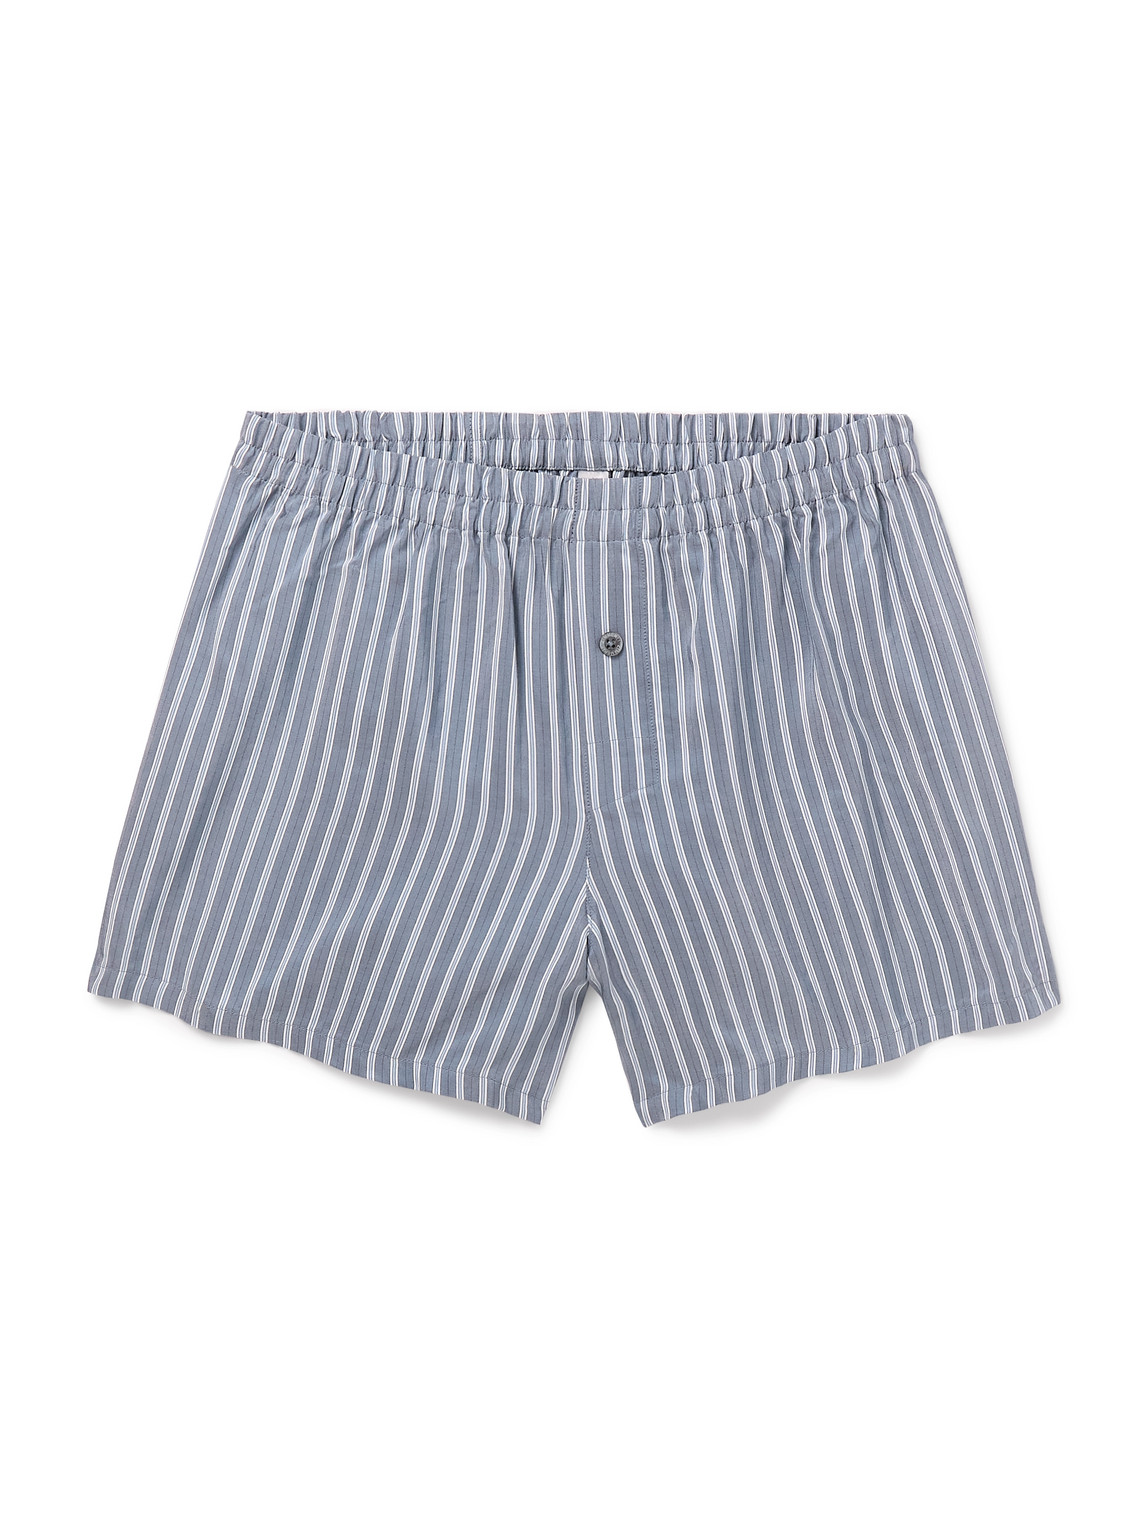 Striped Voile Boxer Shorts